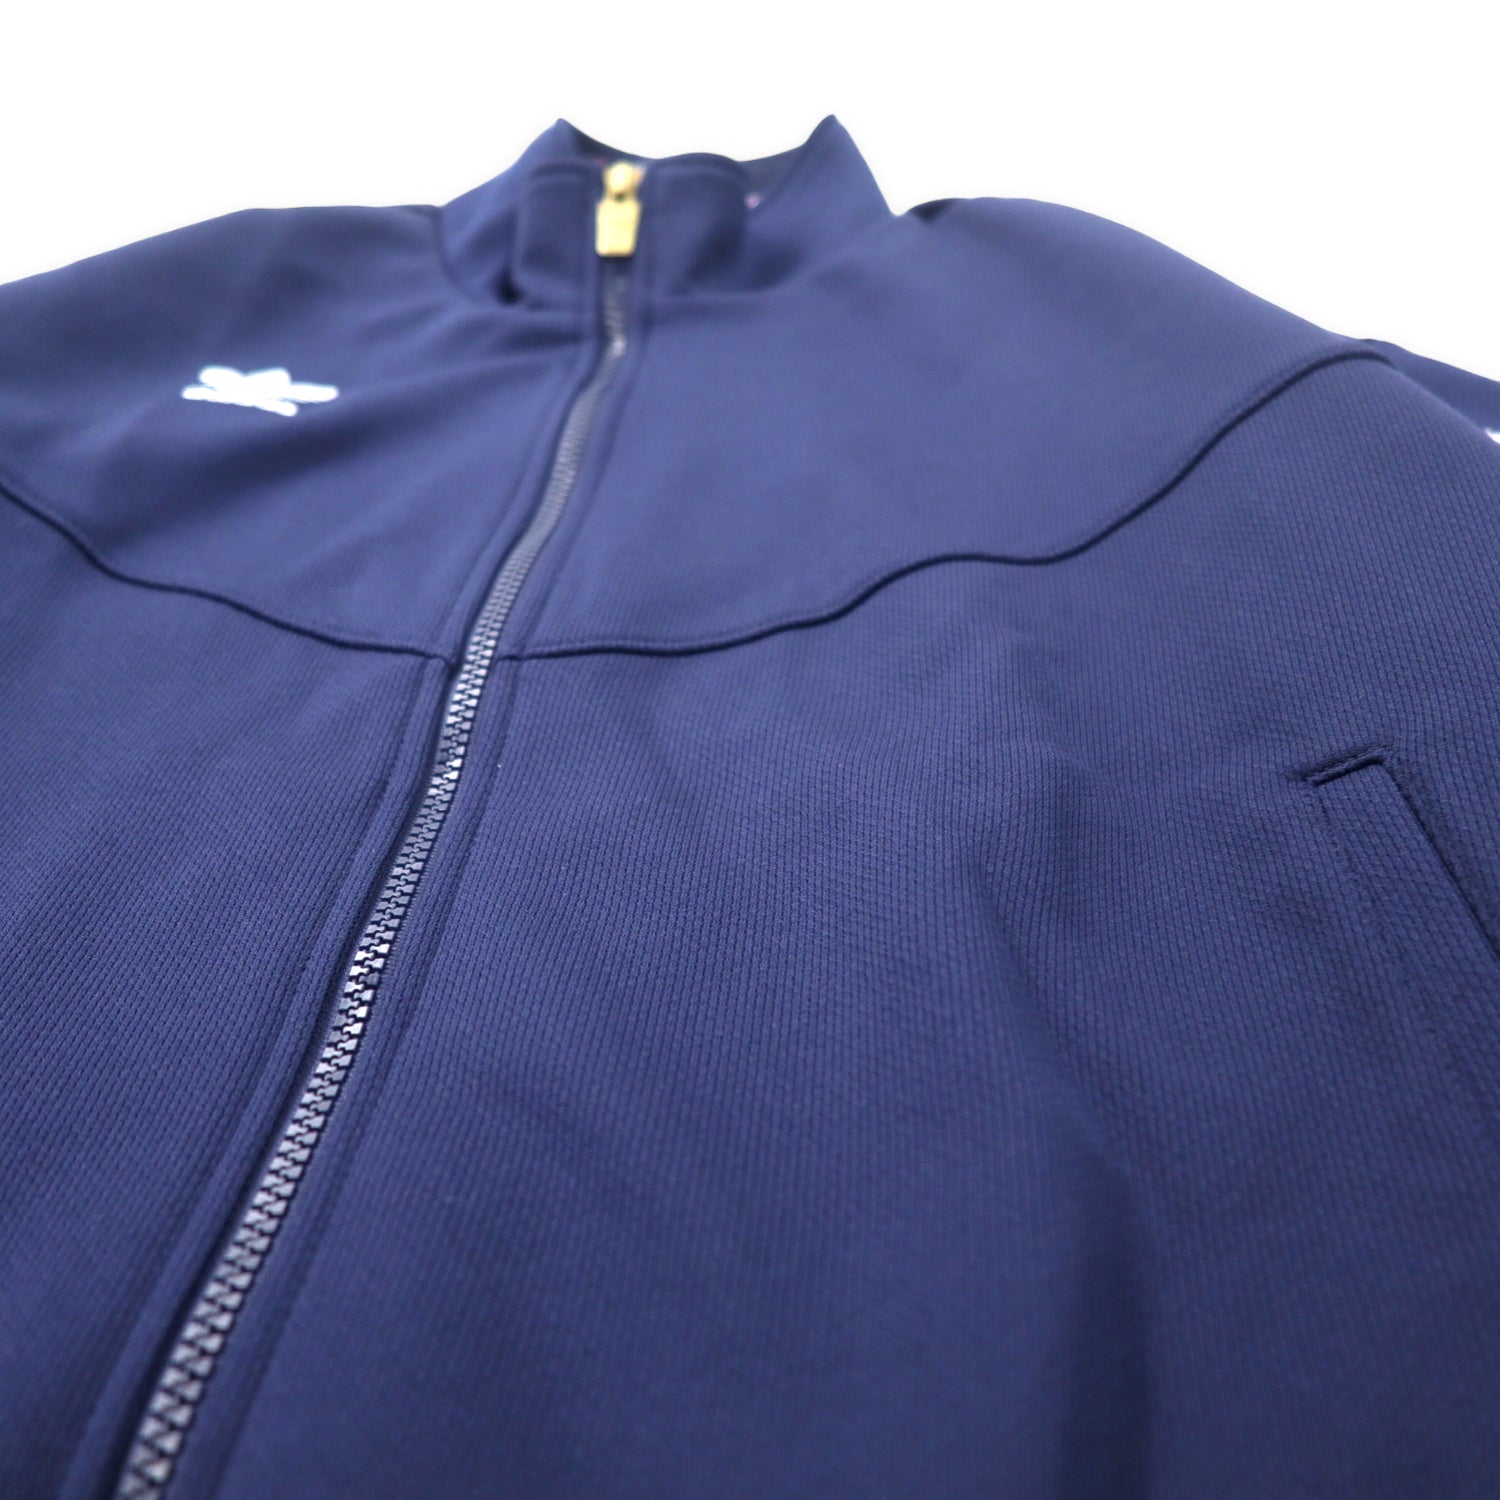 Adidas 90's Descente MADE TRACK JACKET Jersey L Navy Polyester